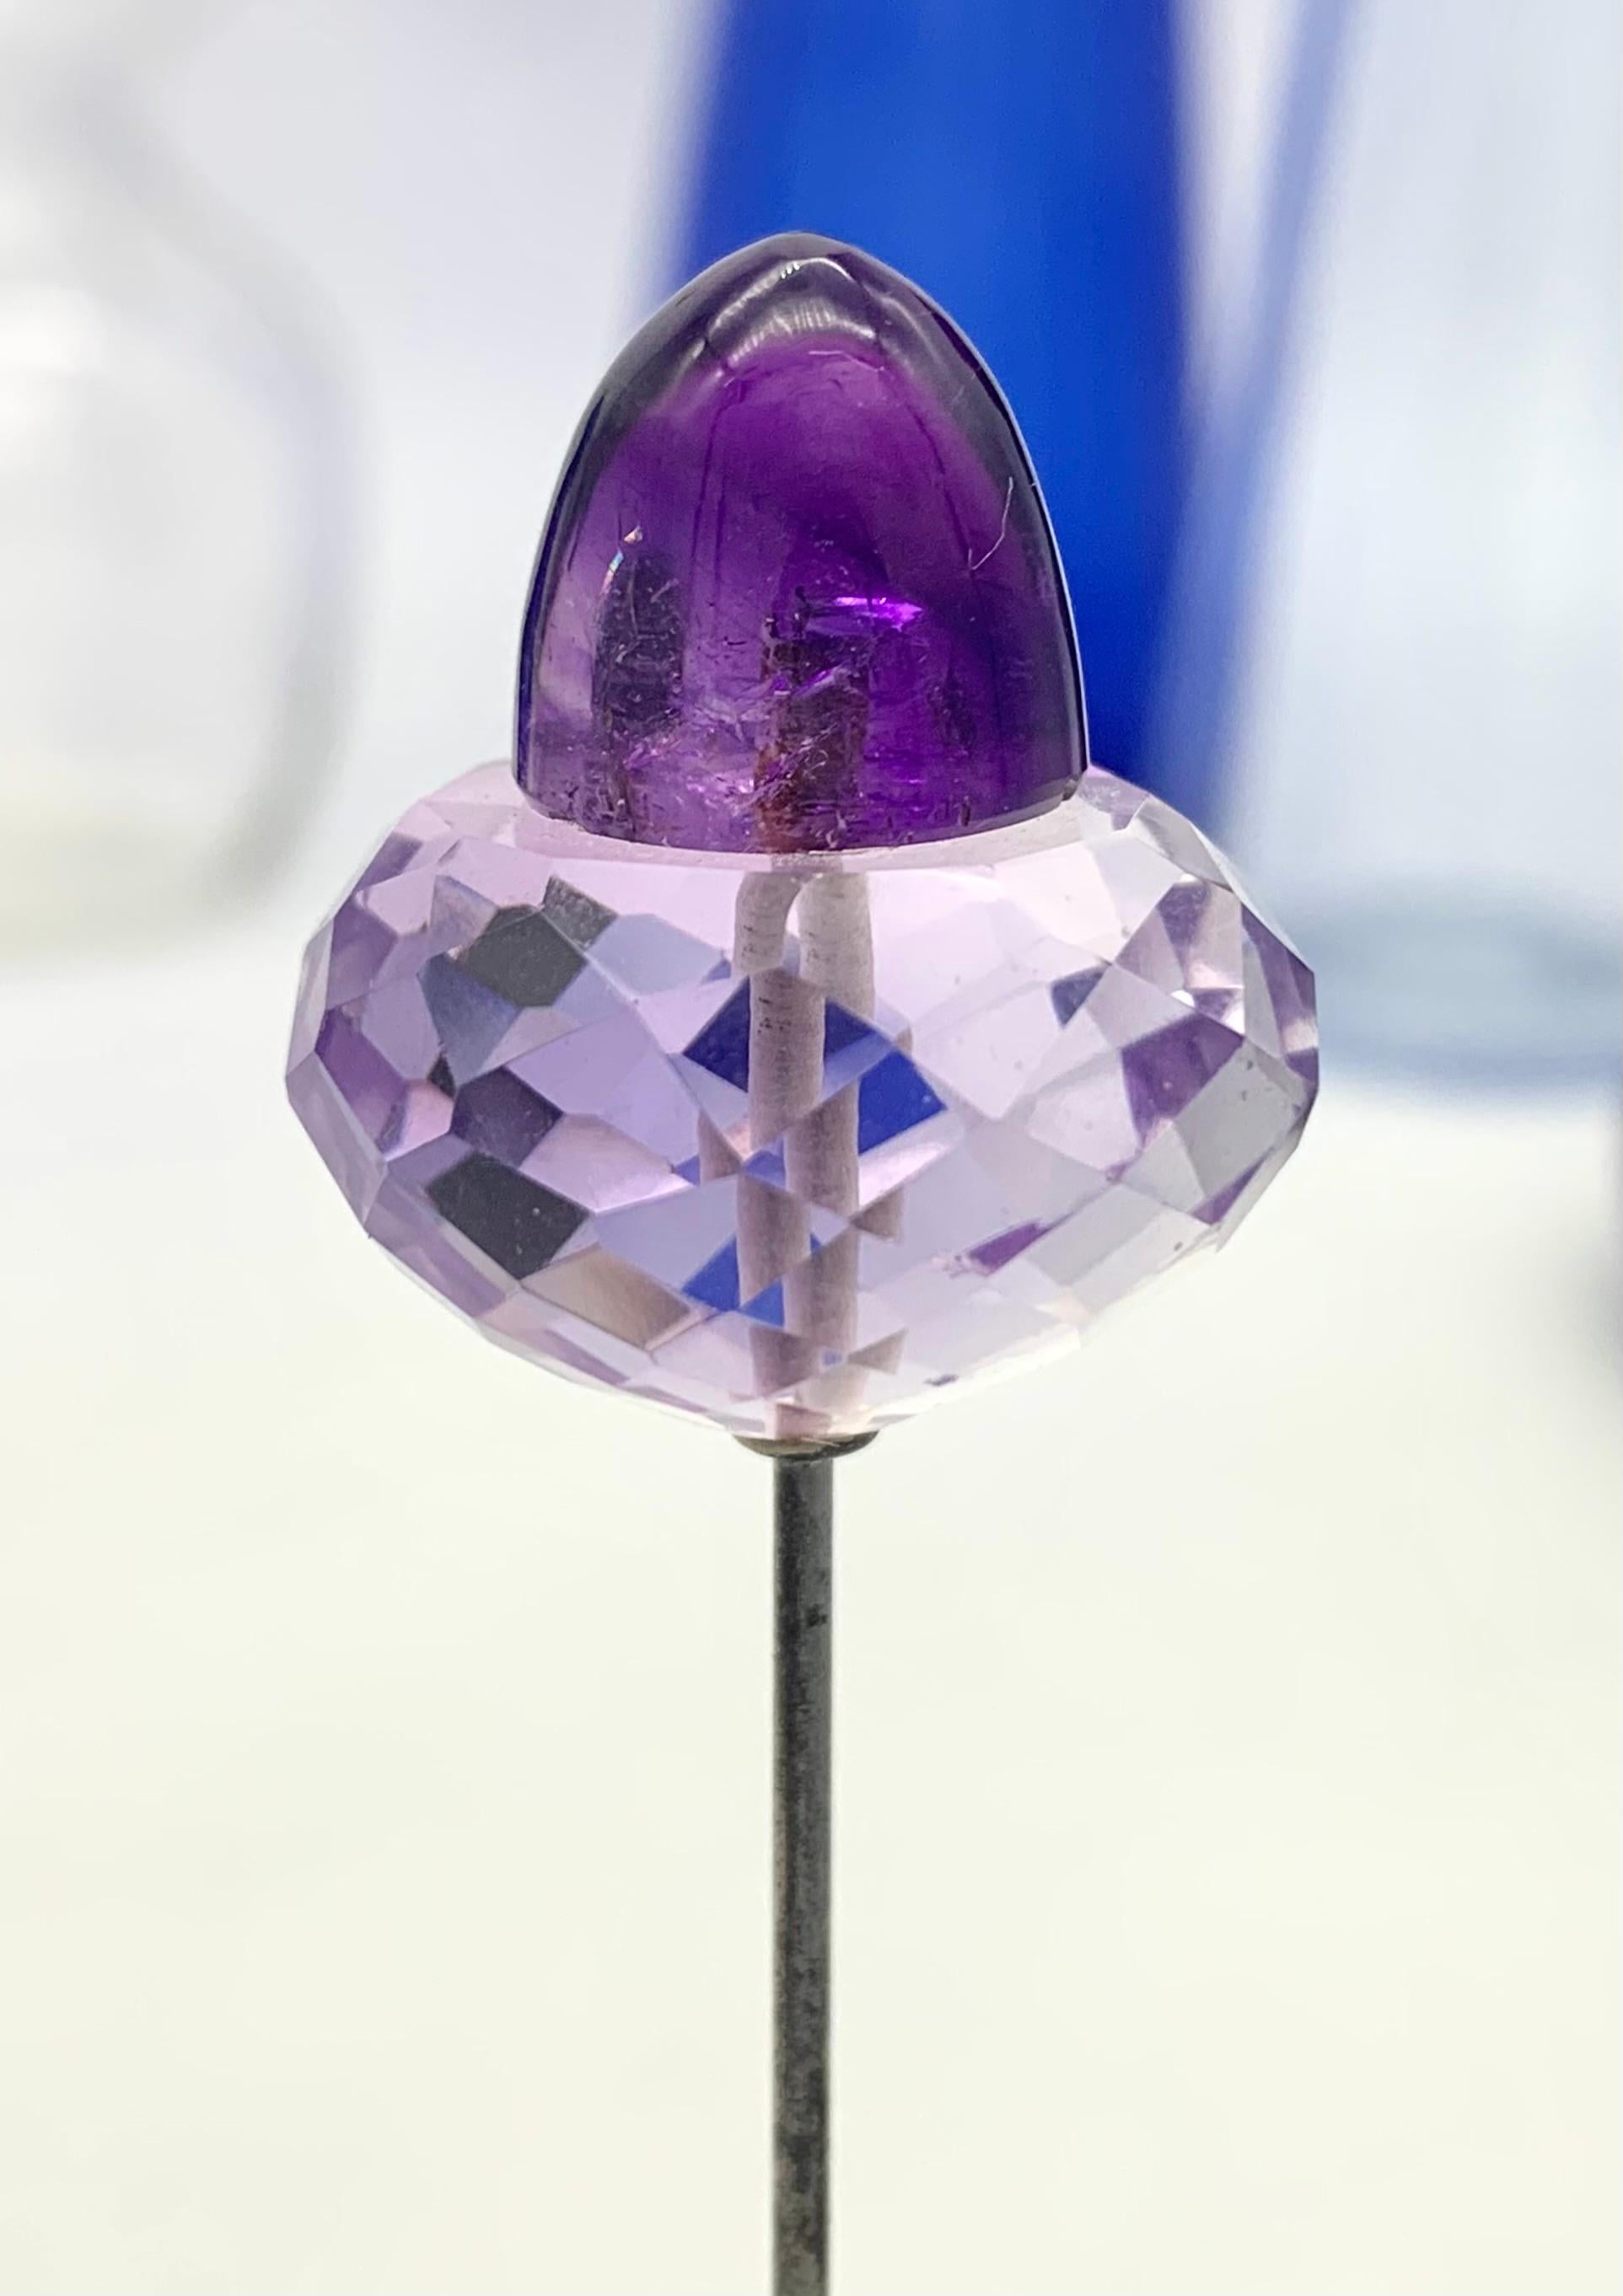 This splendid Belle Epoque hat pin convinces through its simplicity. The finely cut amethysts display all the powers of the stones with wonderfully cut facettes. 